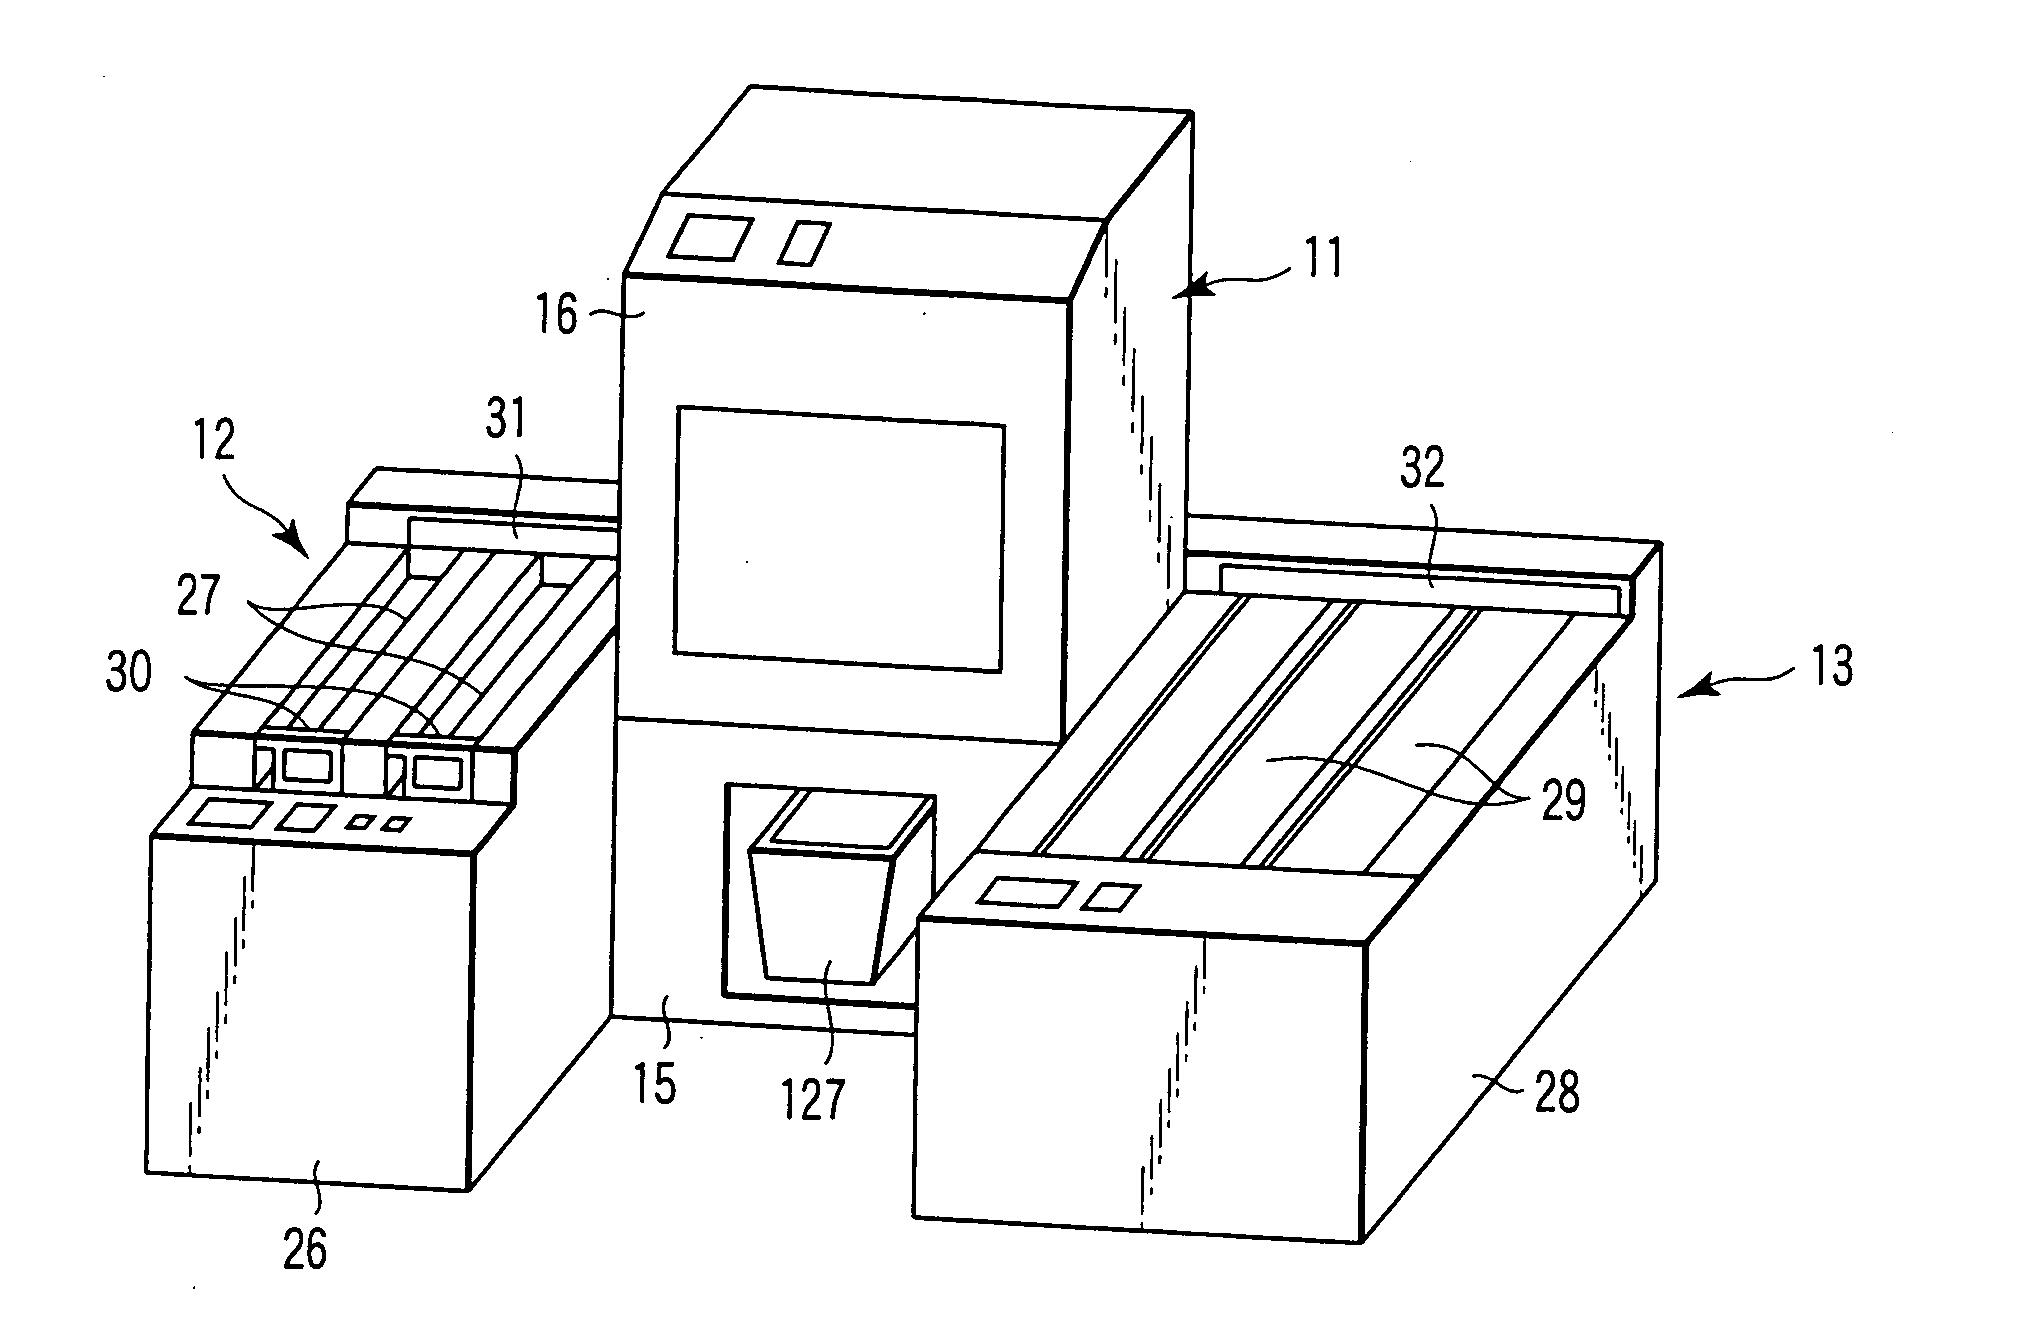 Automated test tube cap removal apparatus